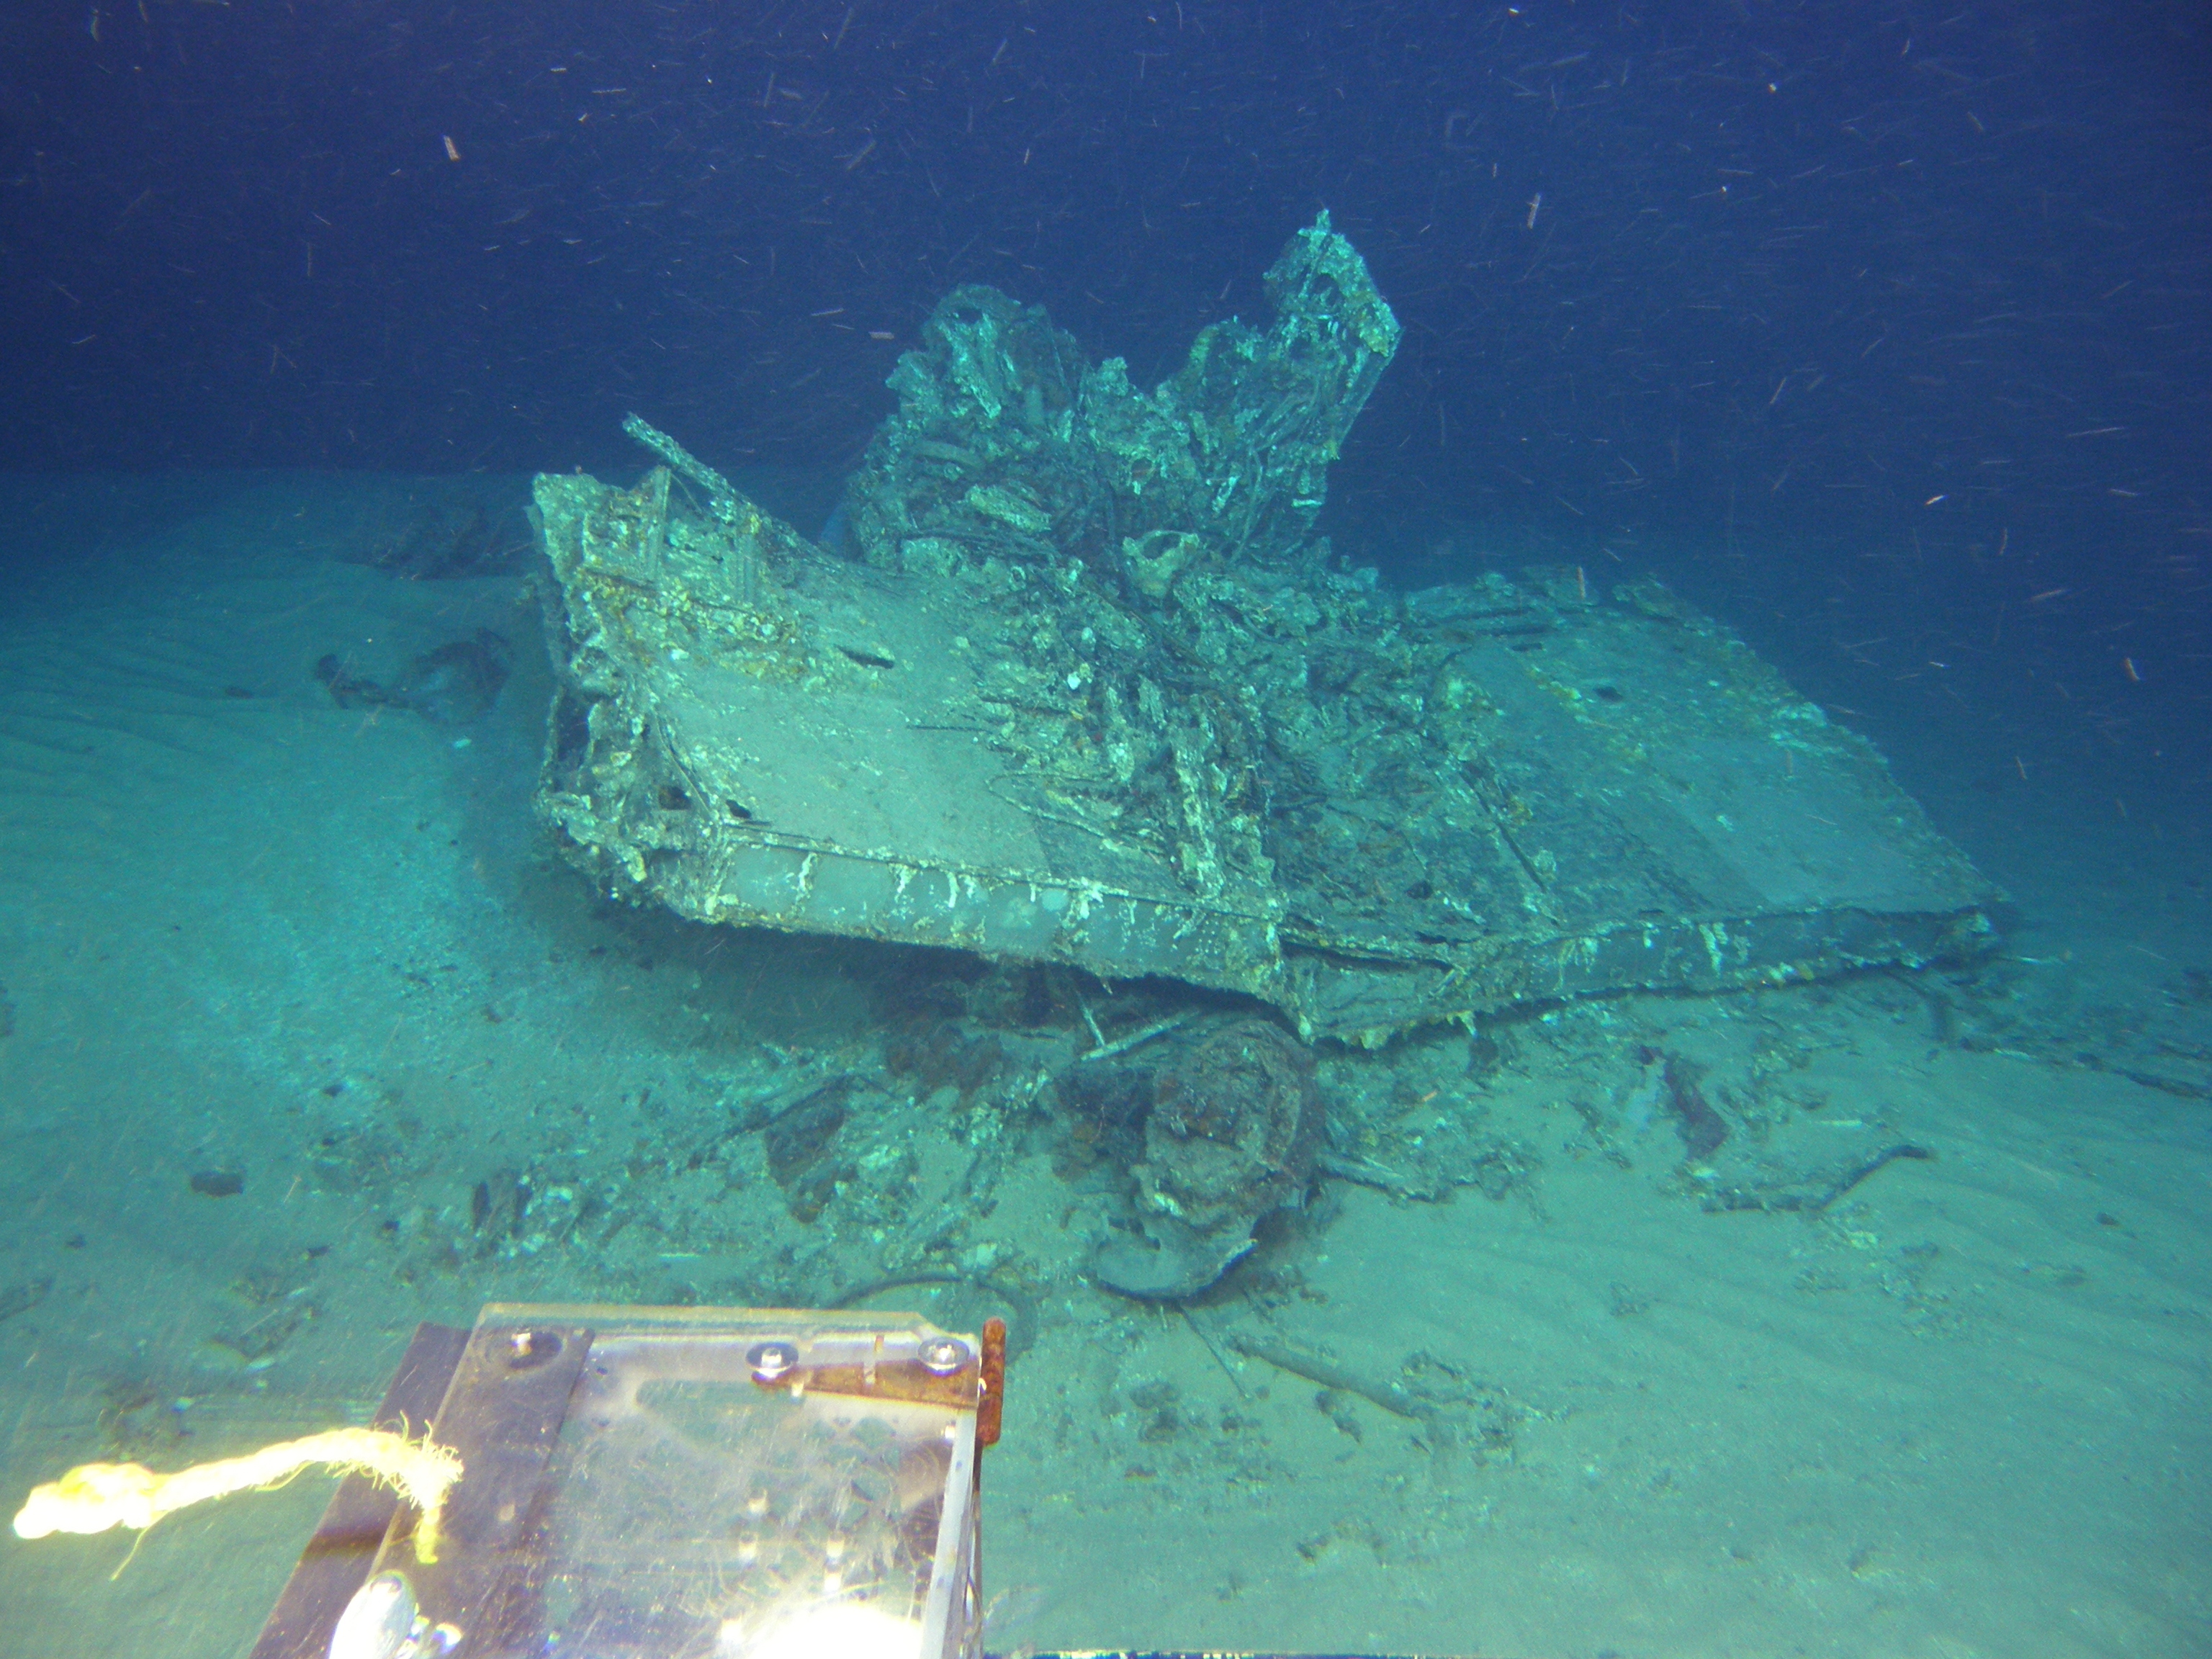 Survey: Engine, wing root and wreckage